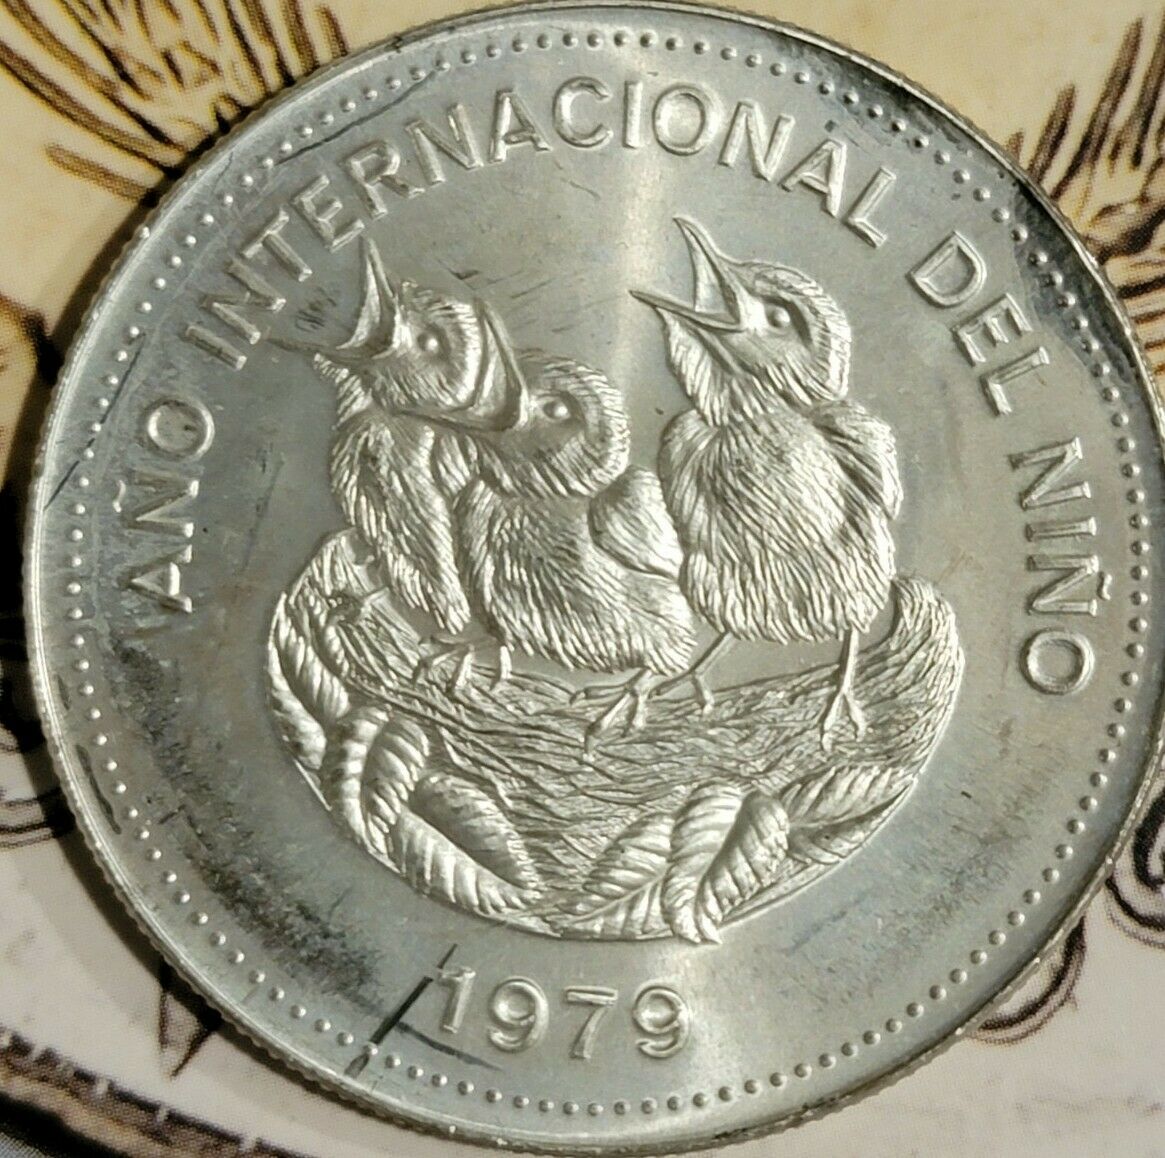 1979 Costa Rica 100 Colones - International Year Of The Child 1 Oz Of Silver